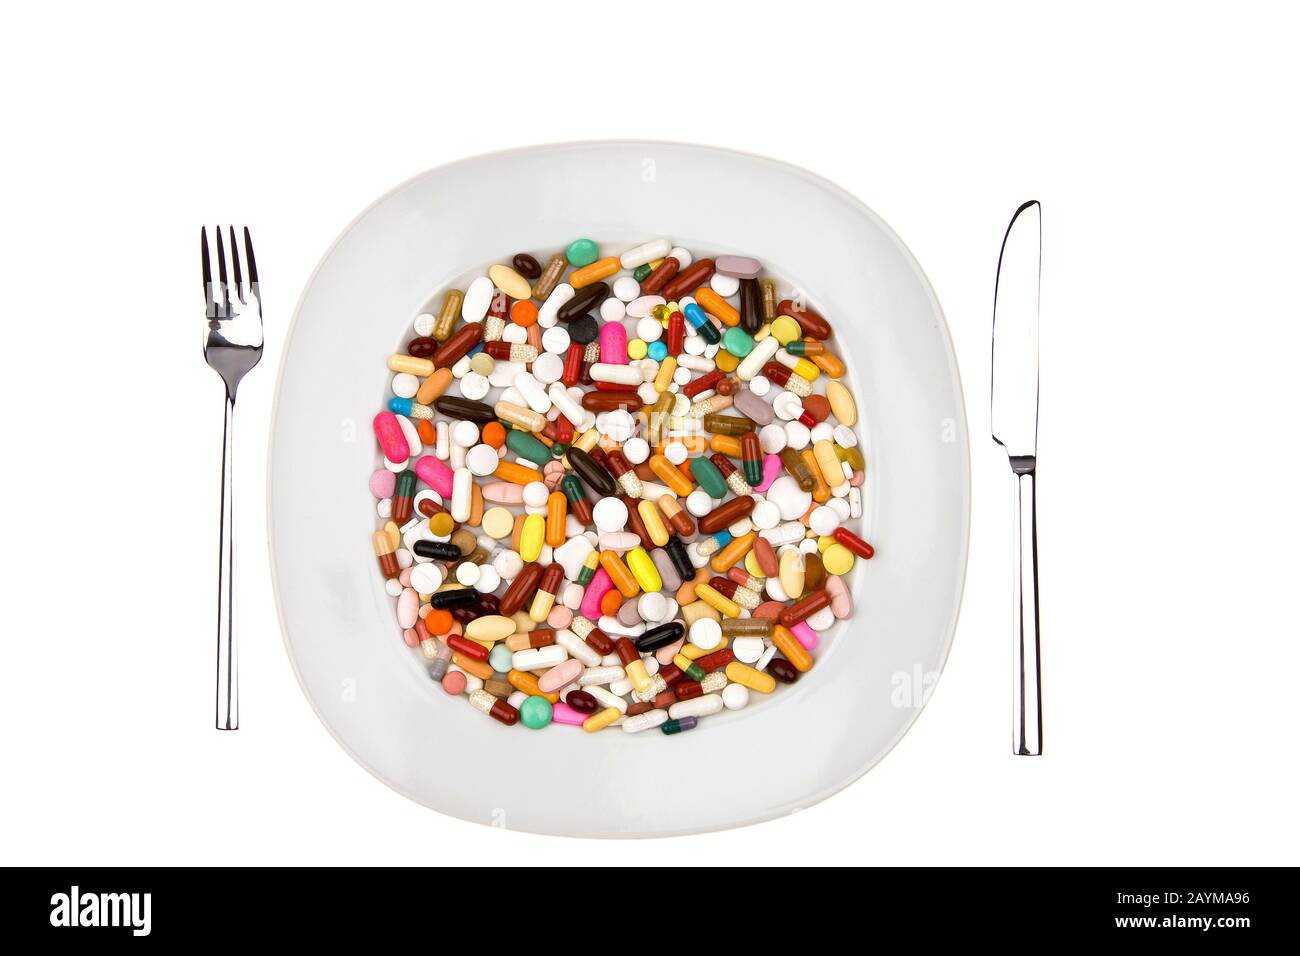 many colorful pills on a plate Stock Photo